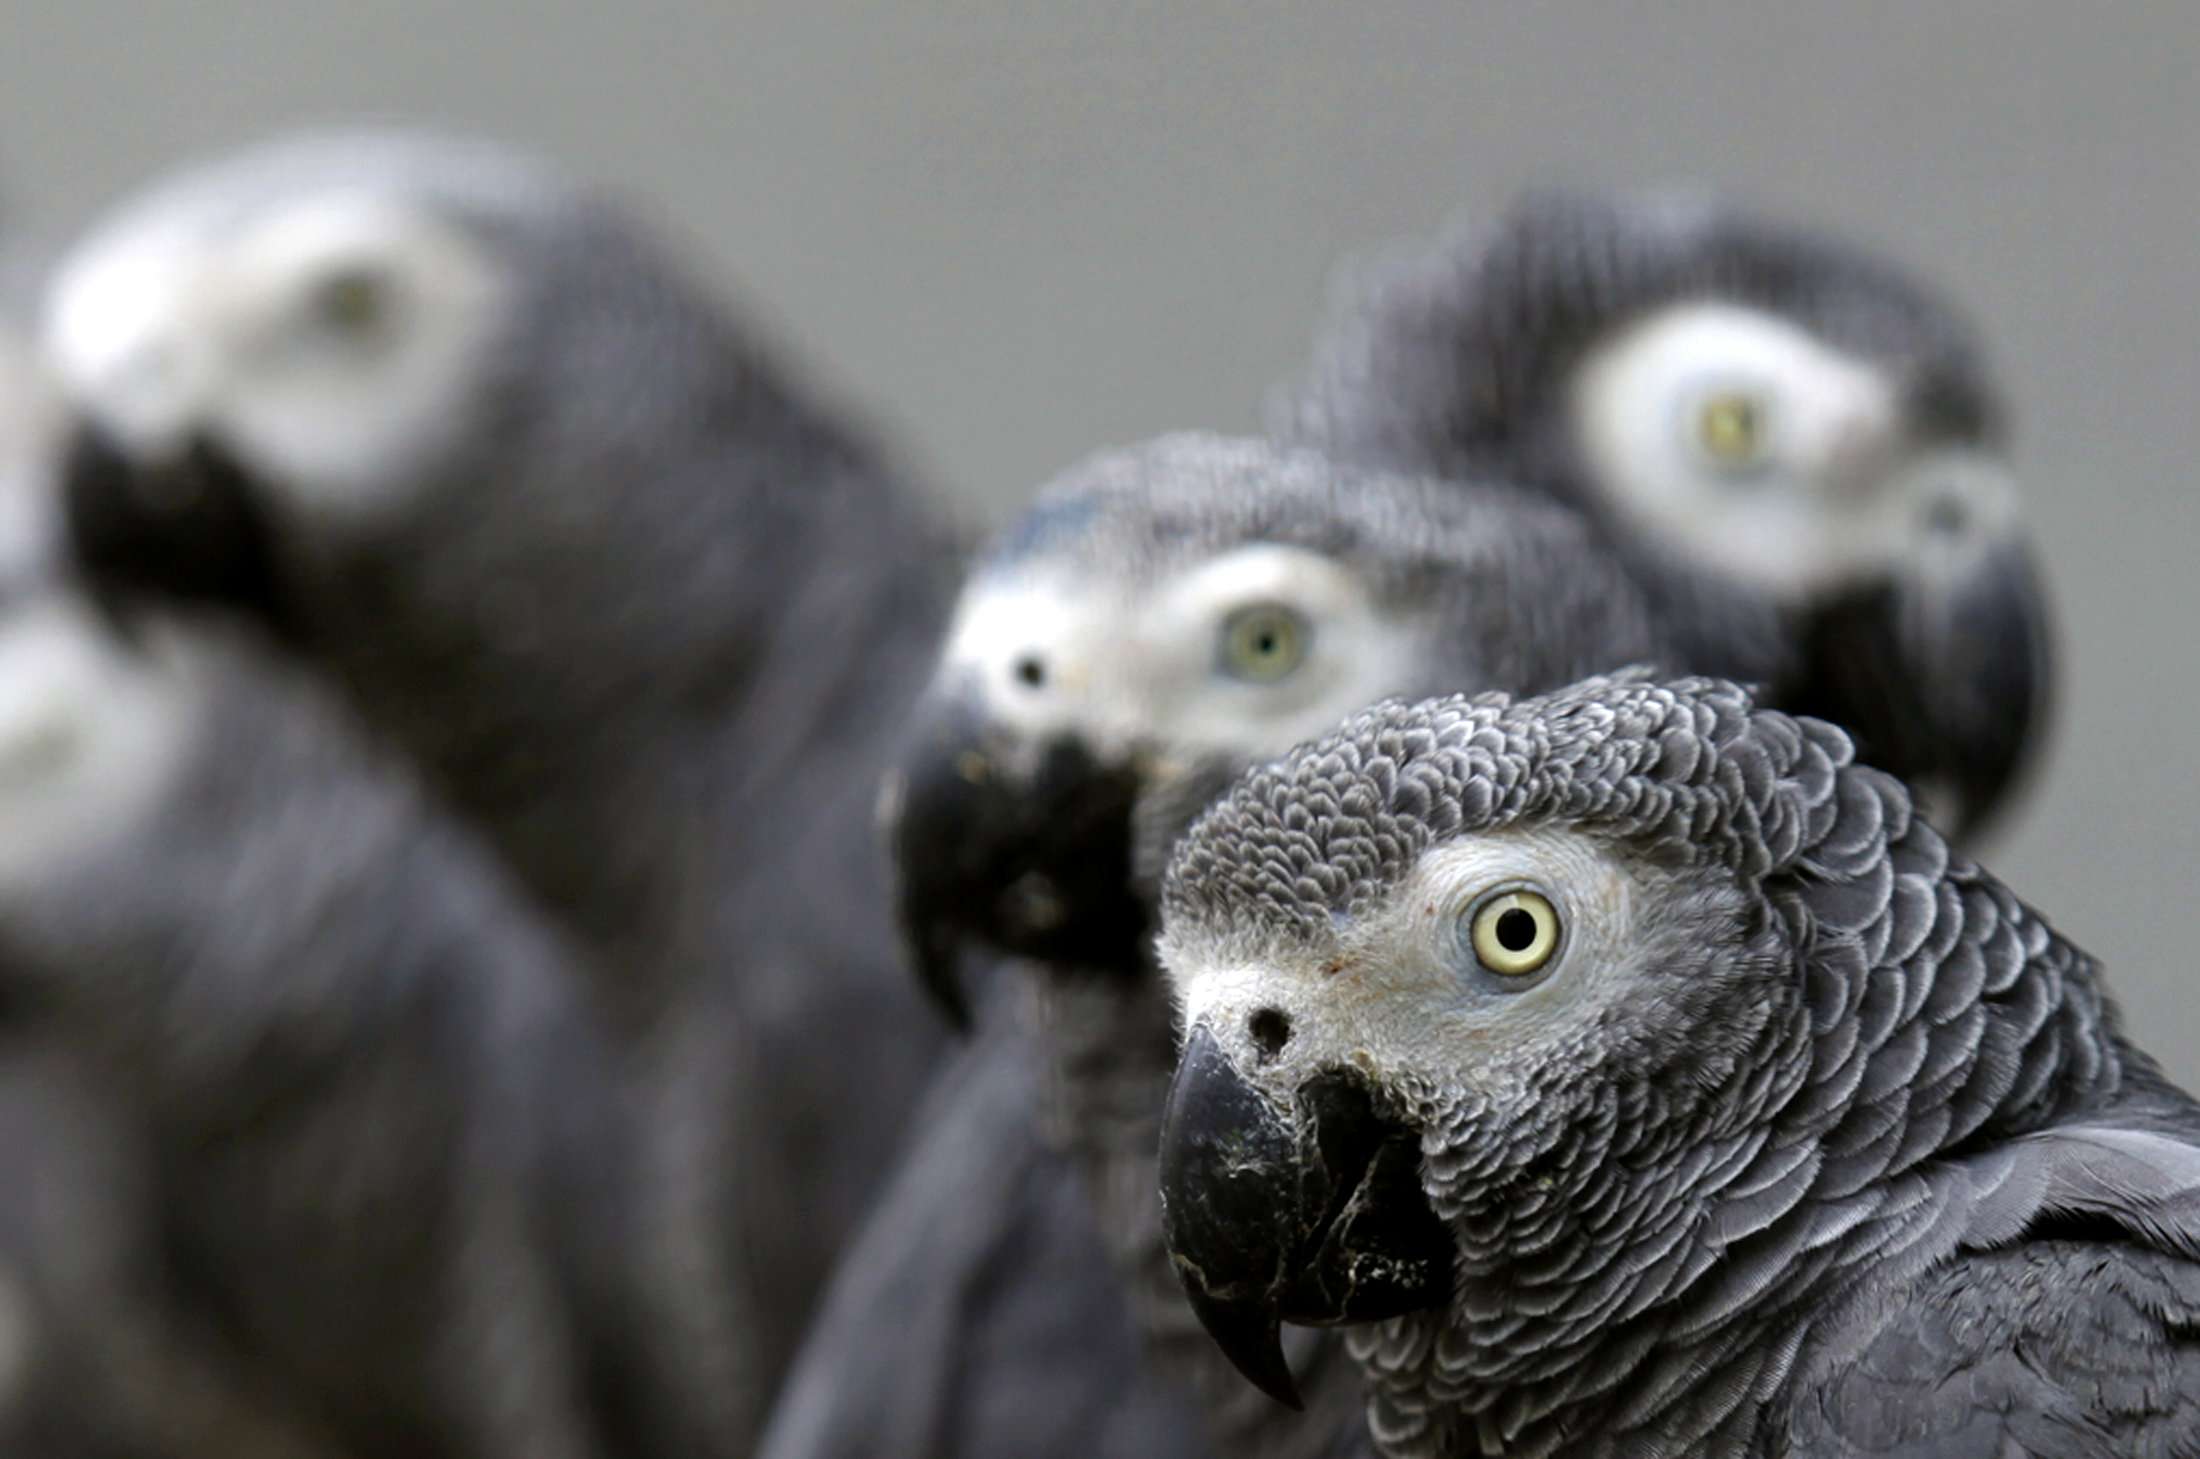 African grey parrots rescued from an illegal trader by Ugandan officials are seen at the Uganda Wildlife Education Centre in Entebbe. Photo: Reuters